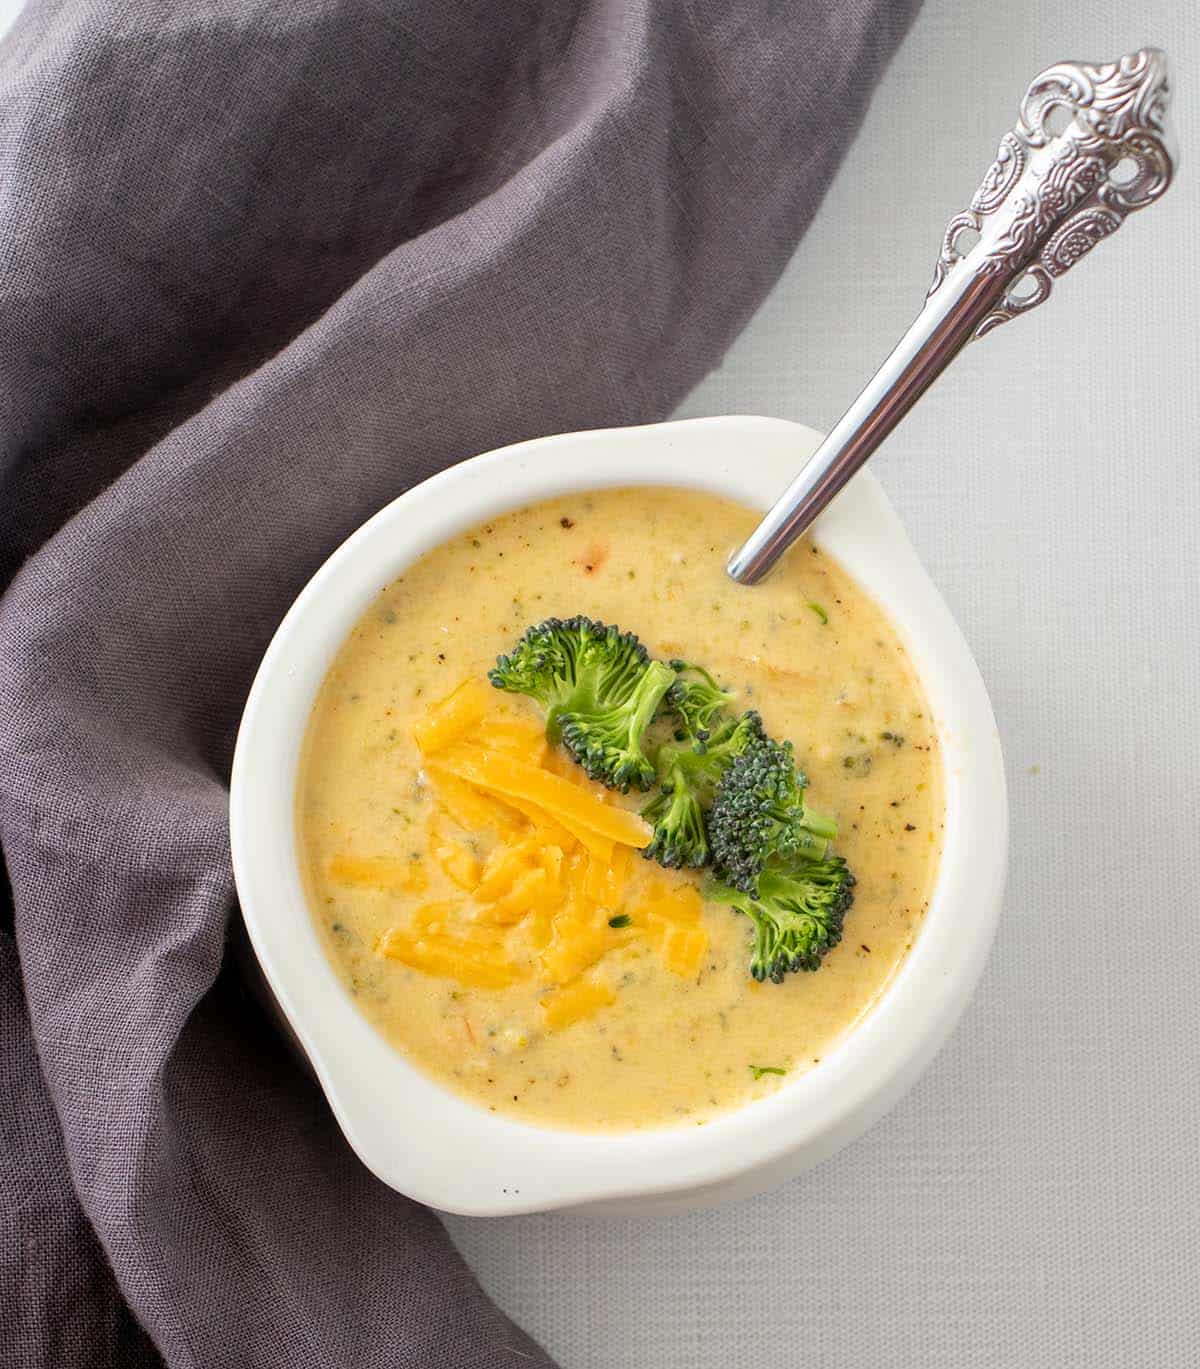 Instant pot broccoli cheddar soup in a white bowl topped with shredded cheddar cheese and broccoli florets. A silver spoon in bowl and a grey napkin next to the bowl.